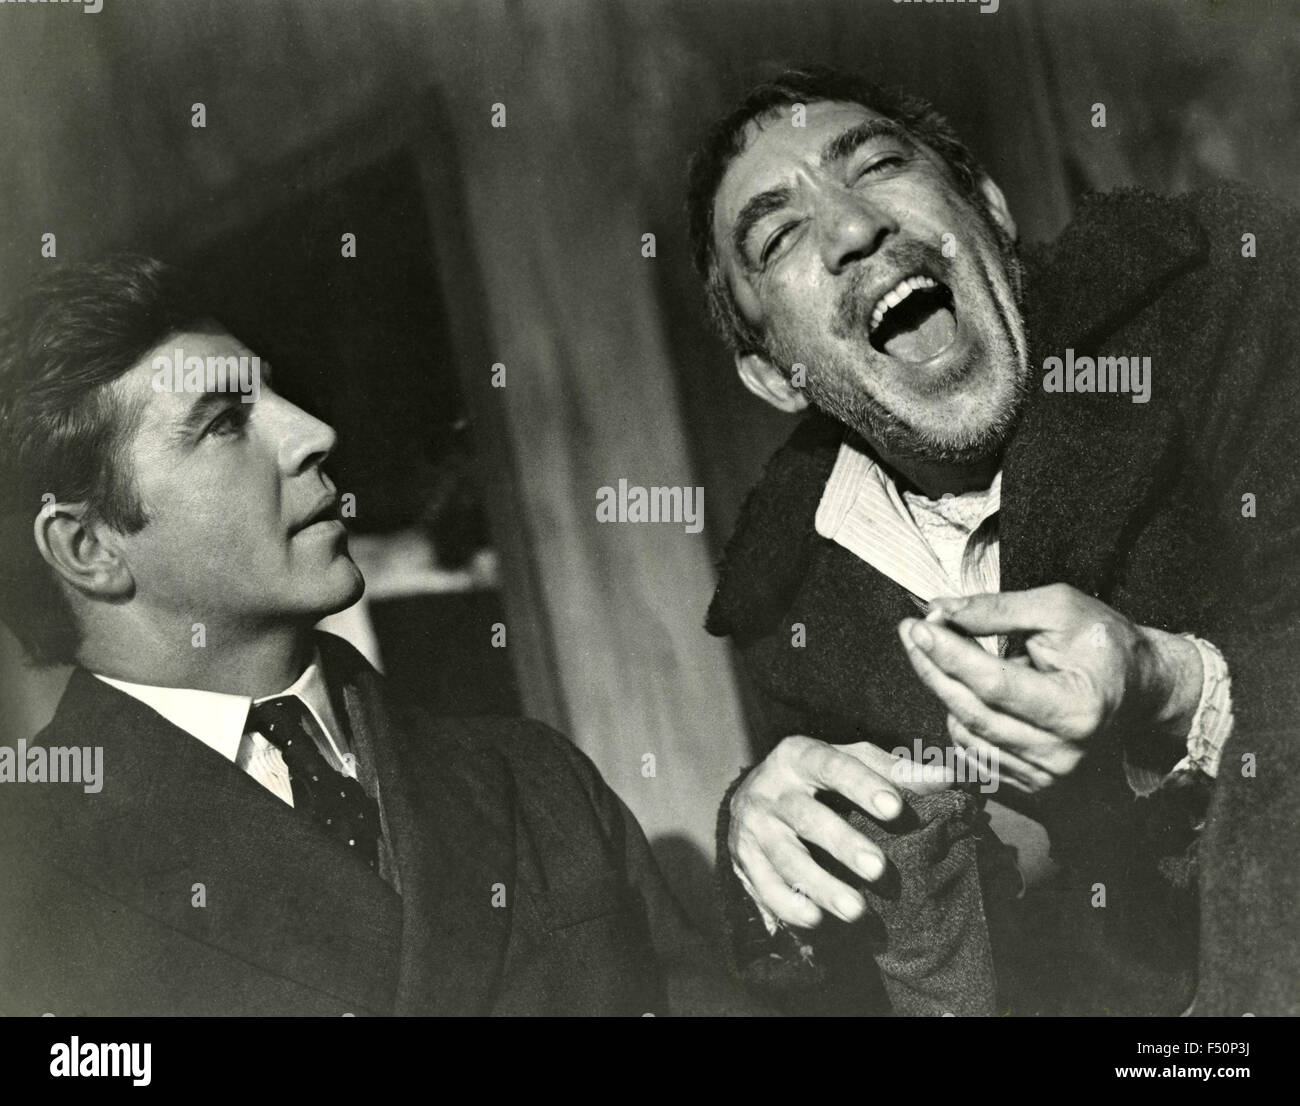 The actors Anthony Quinn and Alan Bates in a scene from the film "Zorba the  Greek", USA Stock Photo - Alamy